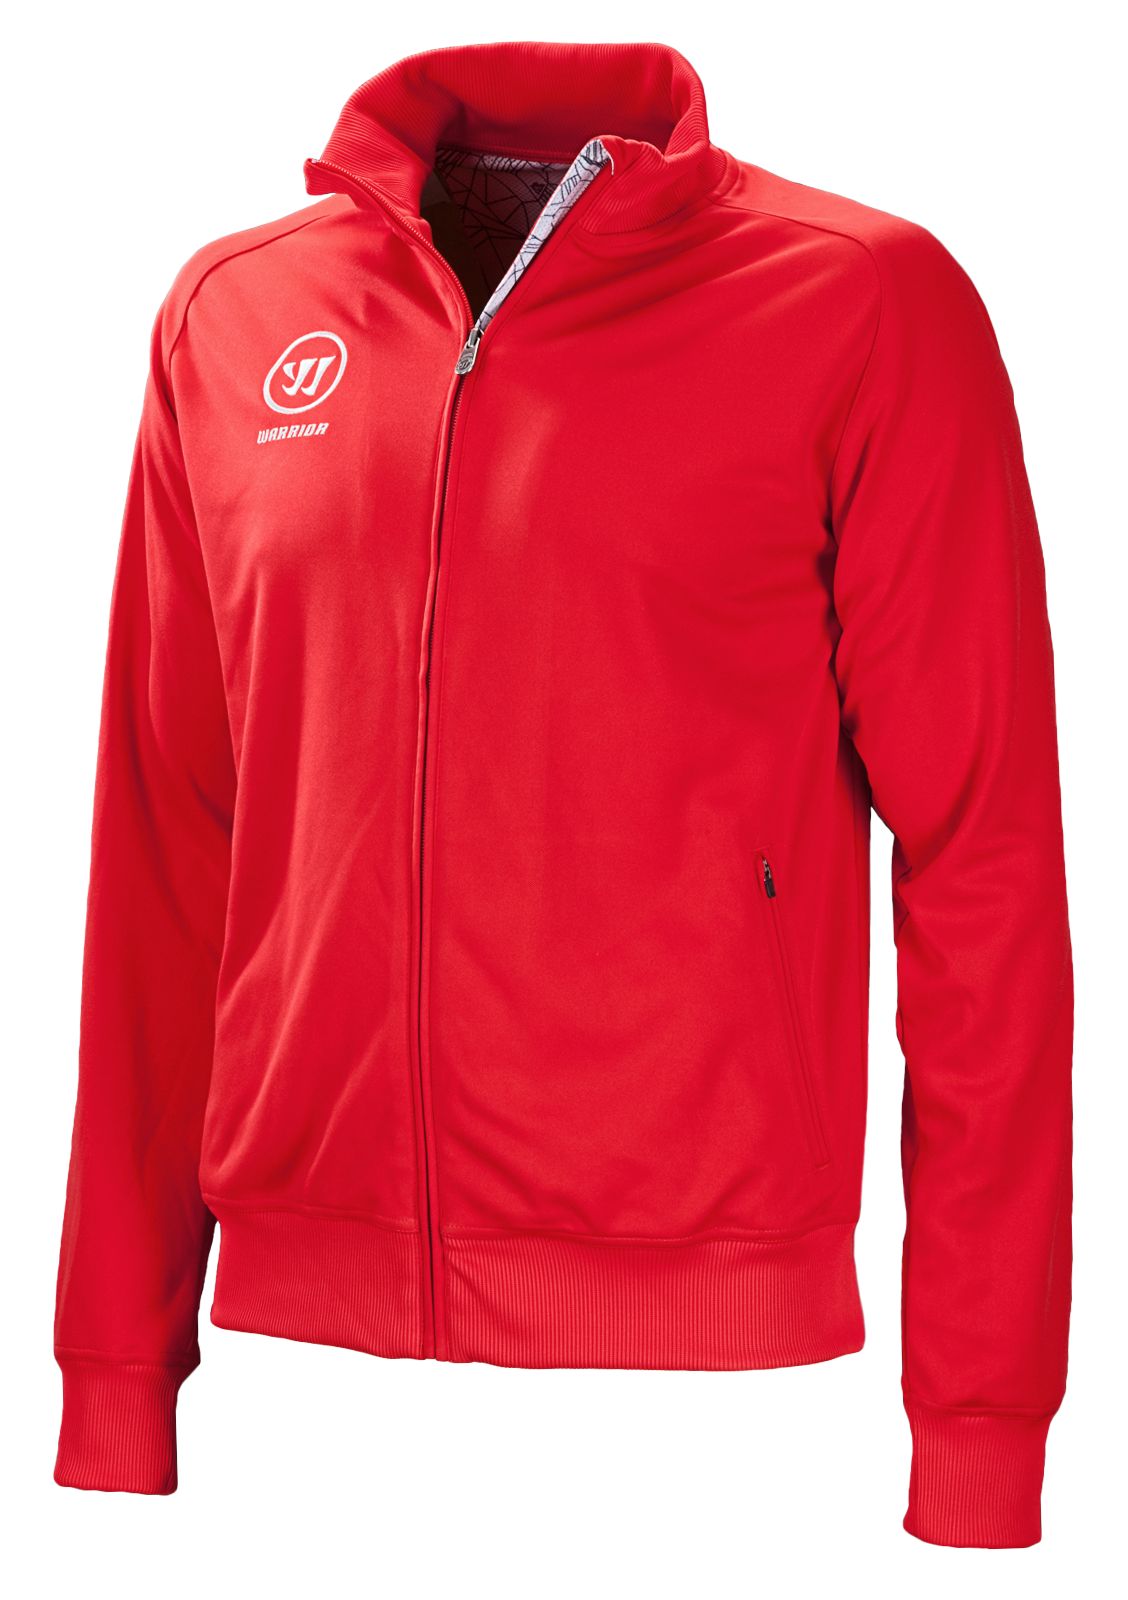 Corp Track Jacket, Formula One Red image number 1